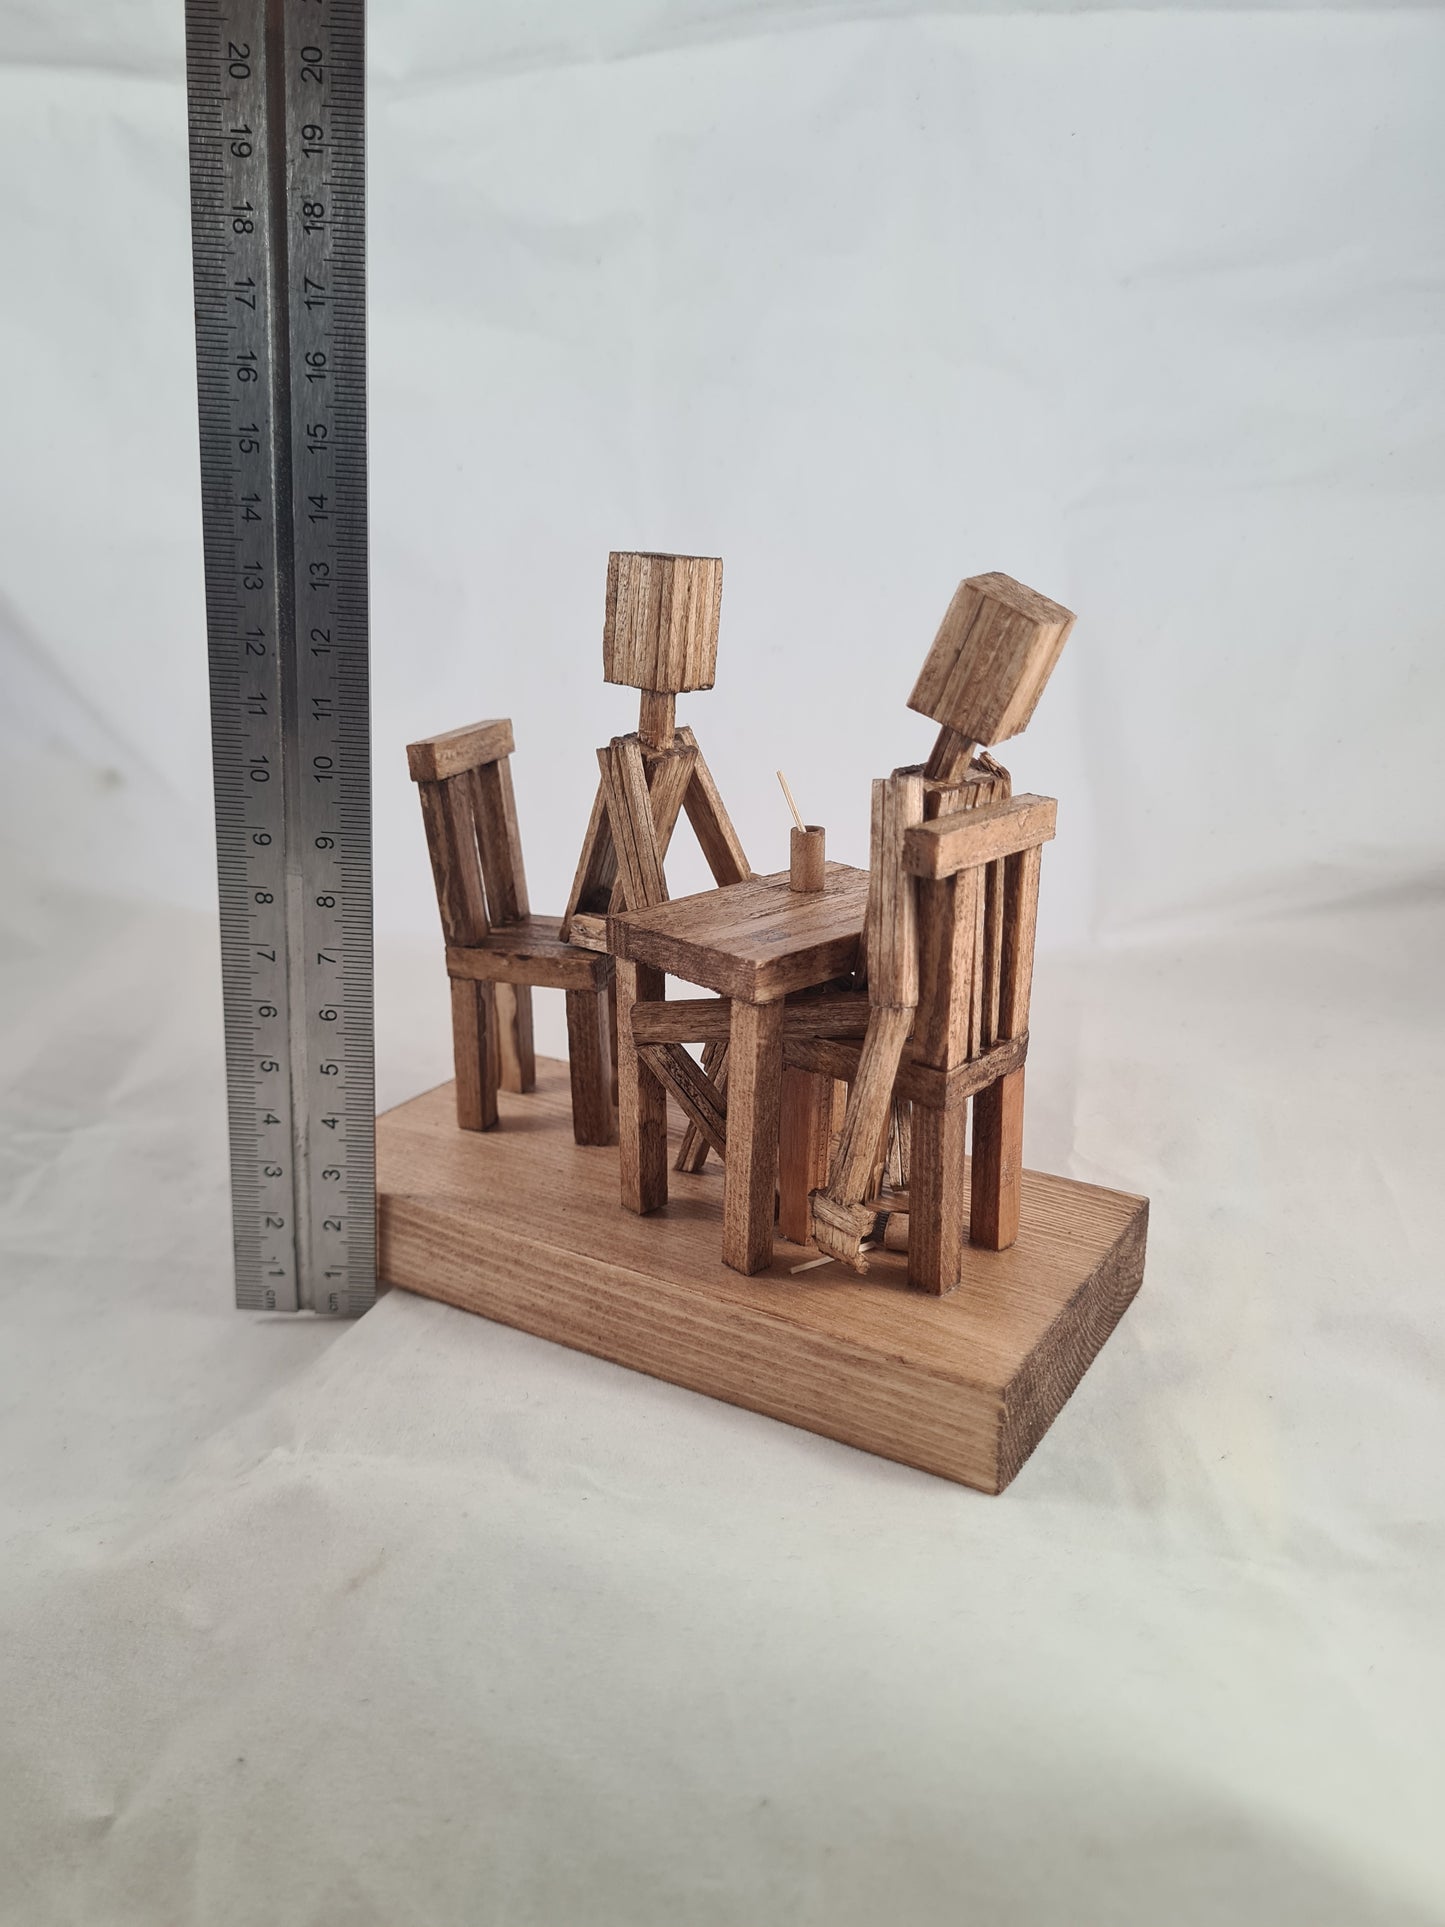 Sleight Of Hand - Handcrafted Wooden Matchstick Figures - Gifts, Ornaments and Decor By Tiggidy Designs